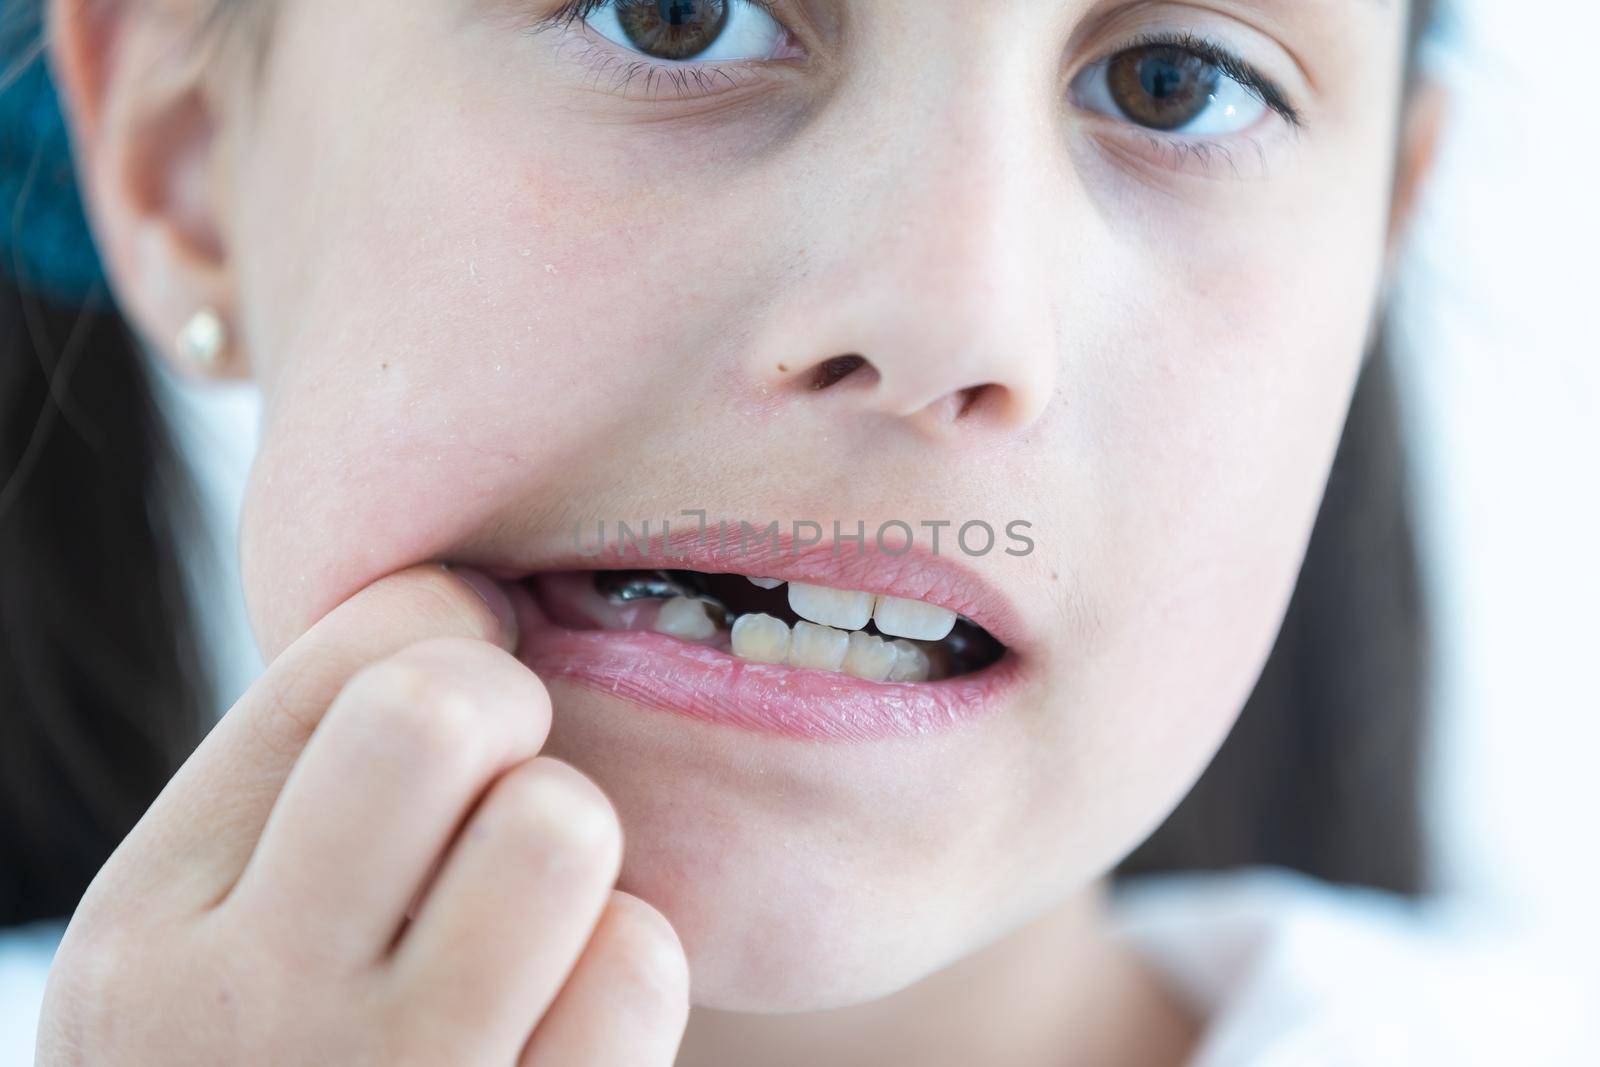 Cropped view of the little girl having her plates checked. Close-up portrait of smiling teenage girl with teeth plates against dentist sitting in clinic. Girl with plates being examined by dentist.